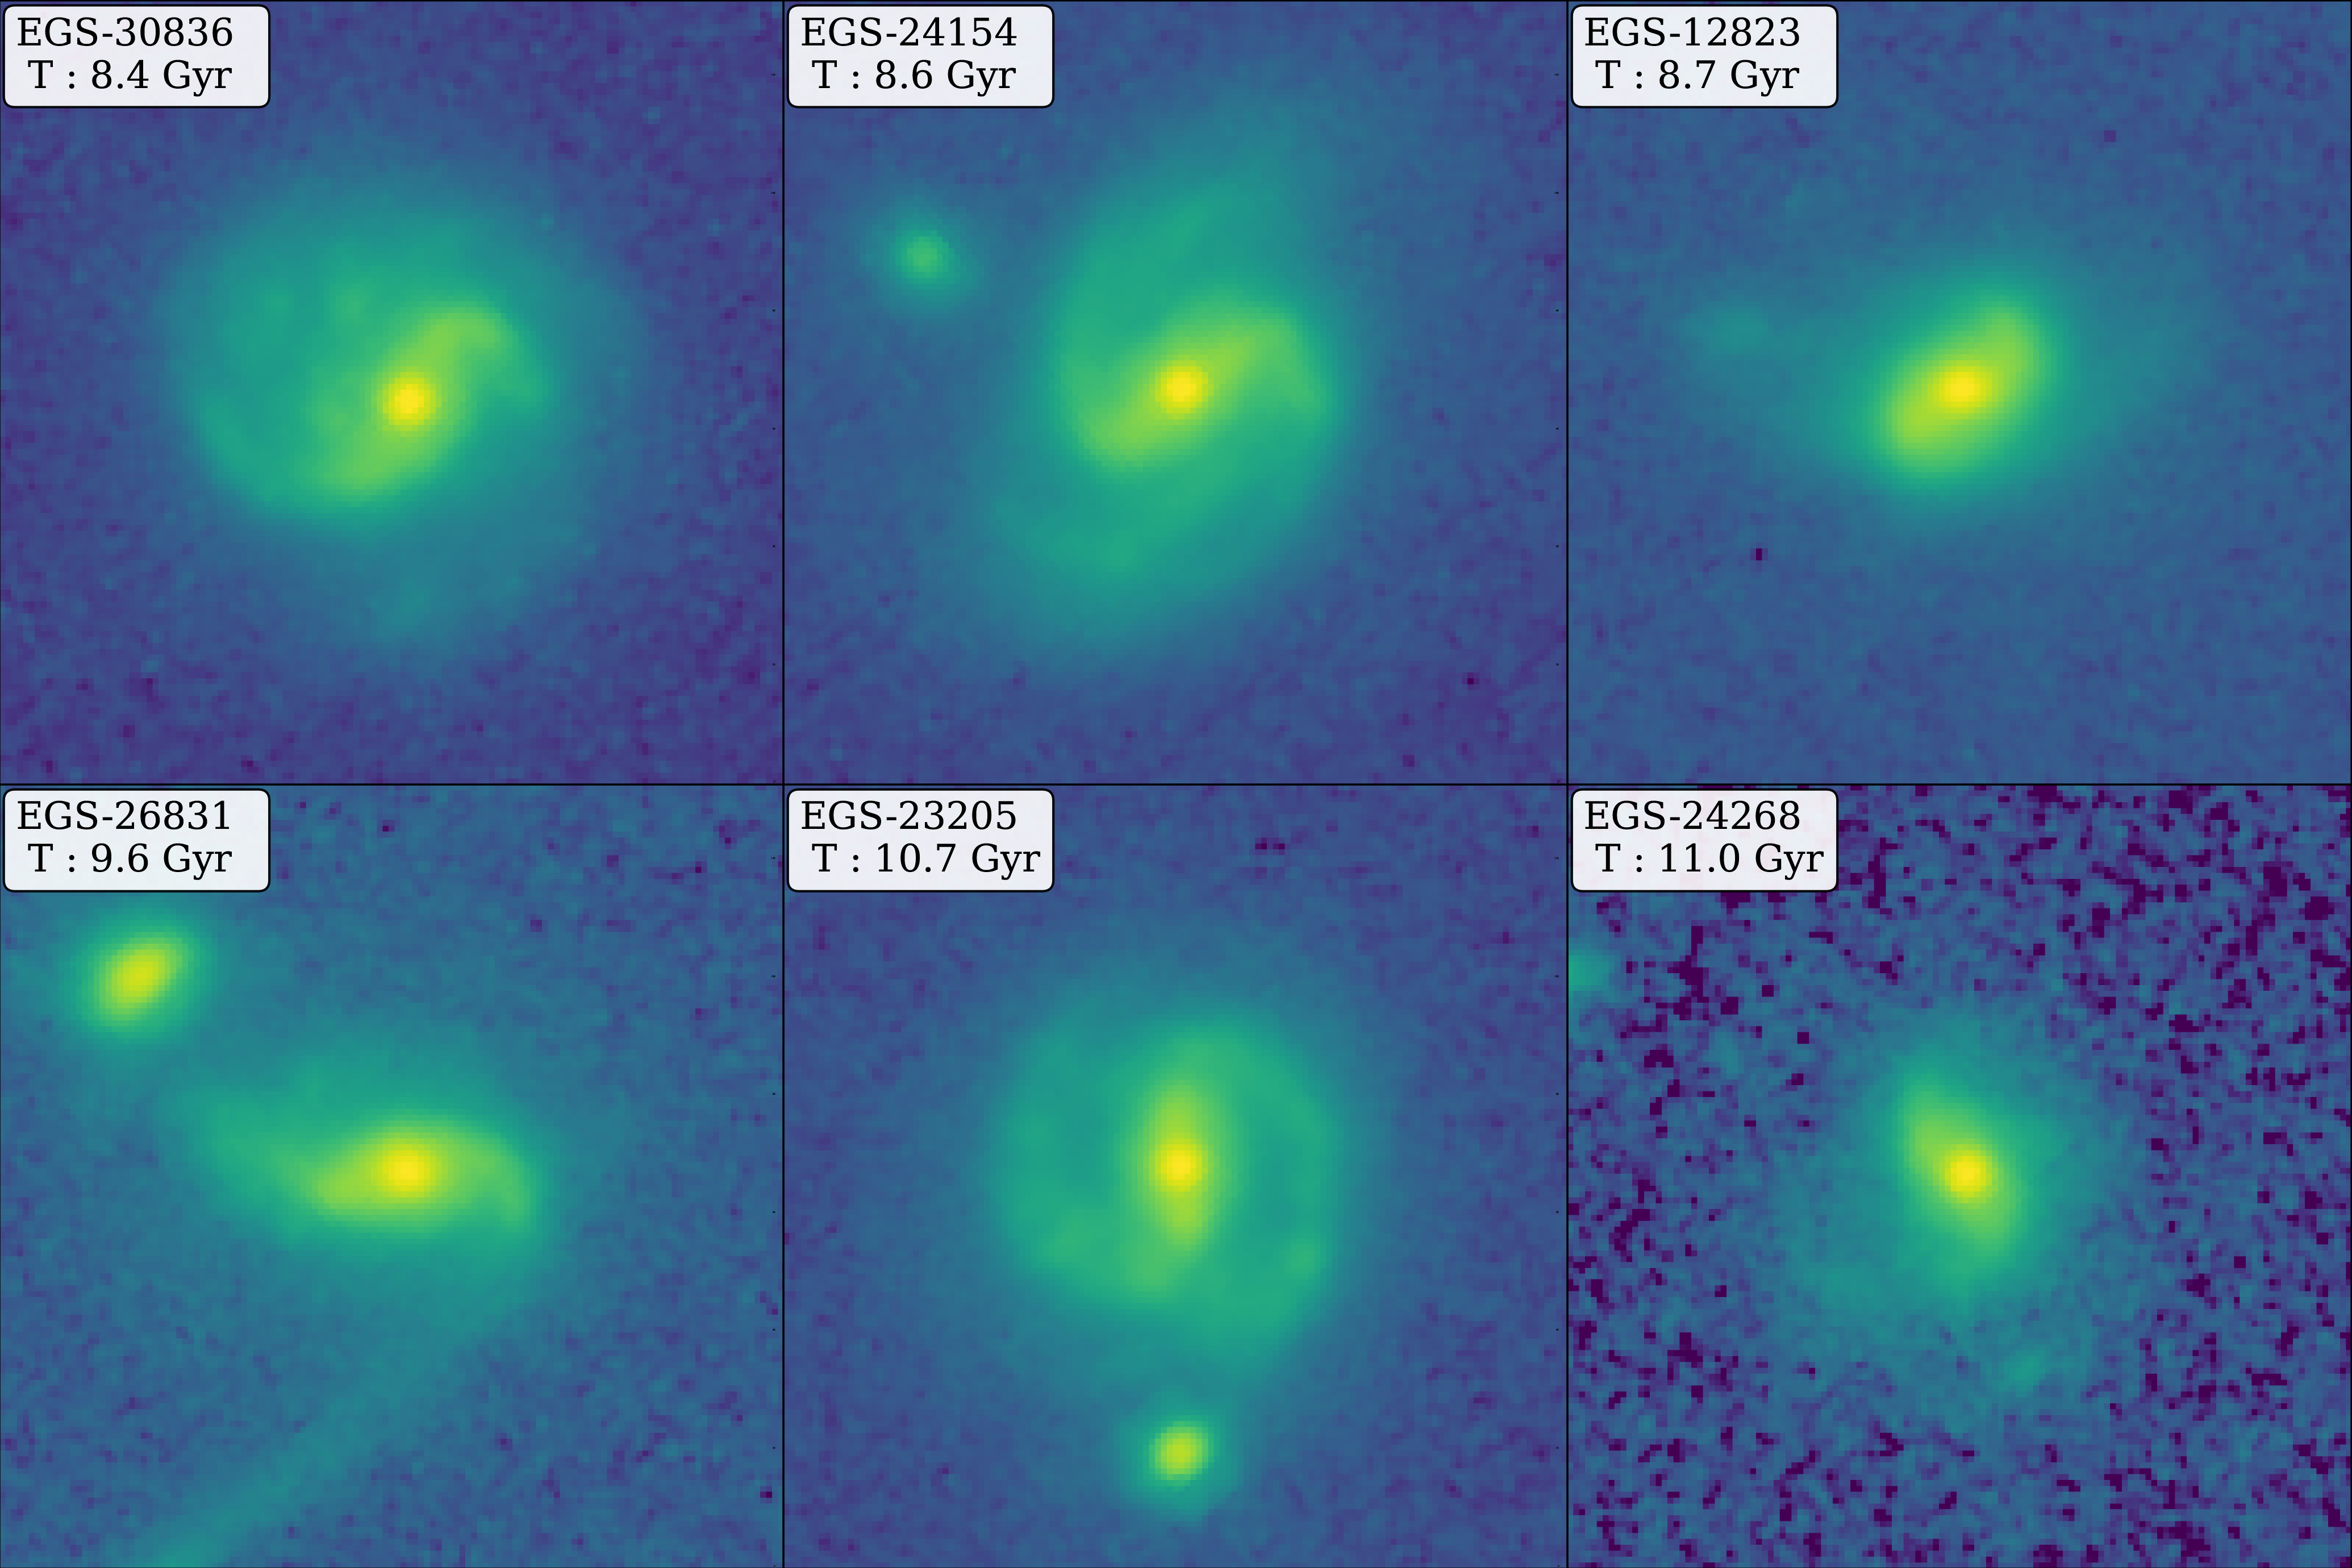 Six galaxies with bar-shaped features in their middles